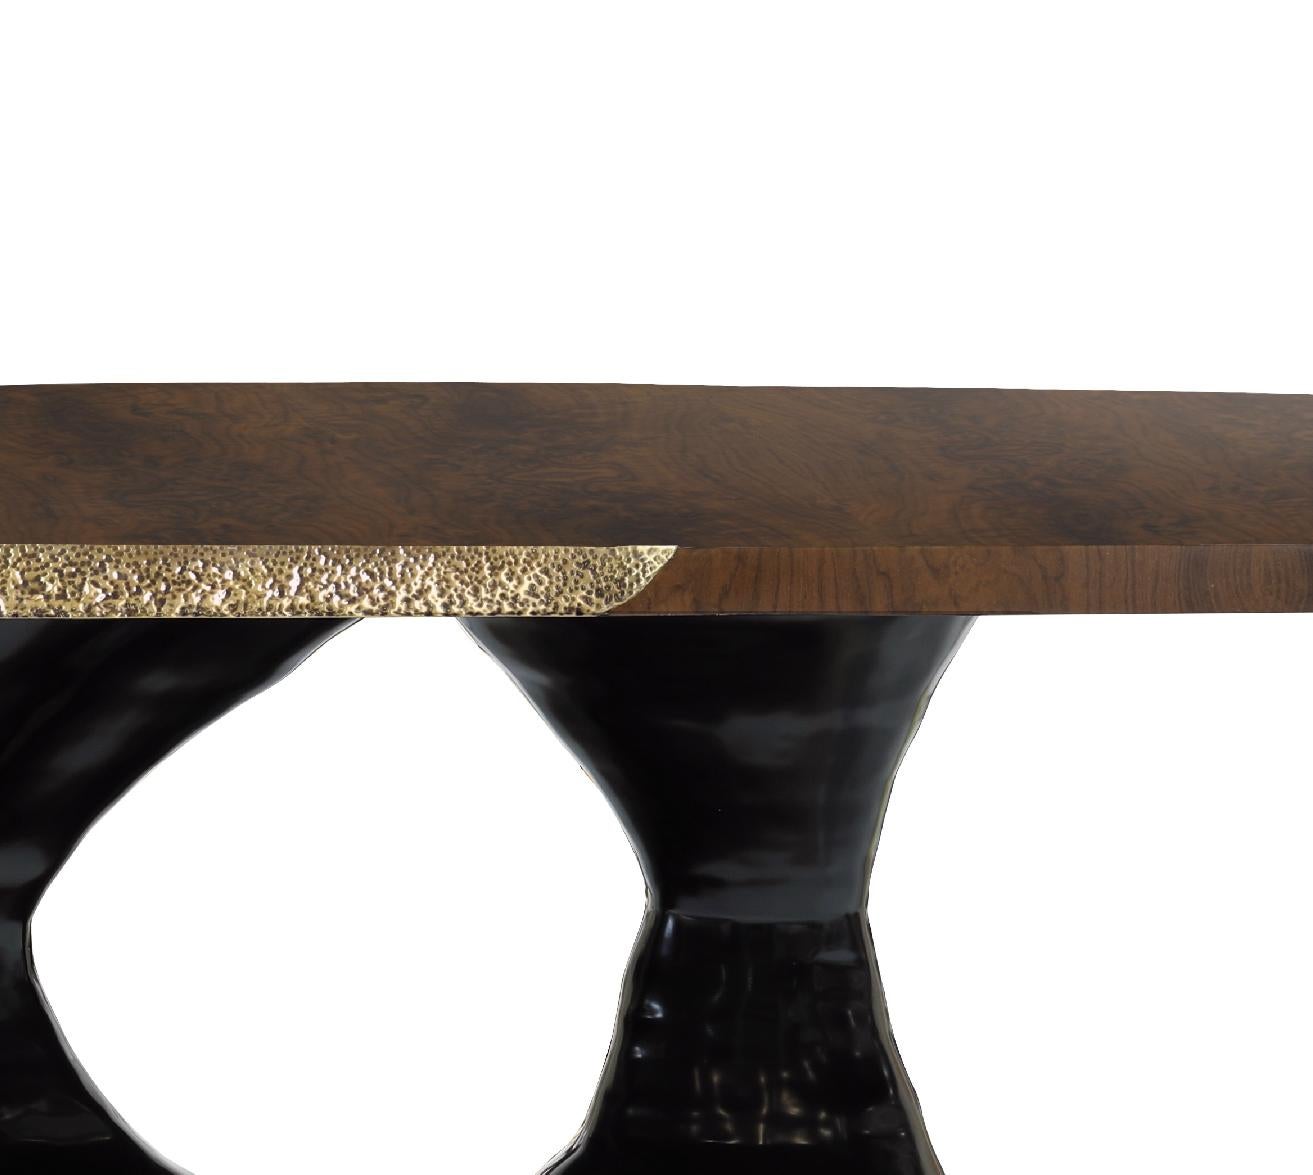 Art Deco Plateau Dining Table with Walnut Tabletop and Lacquer Base by Brabbu For Sale